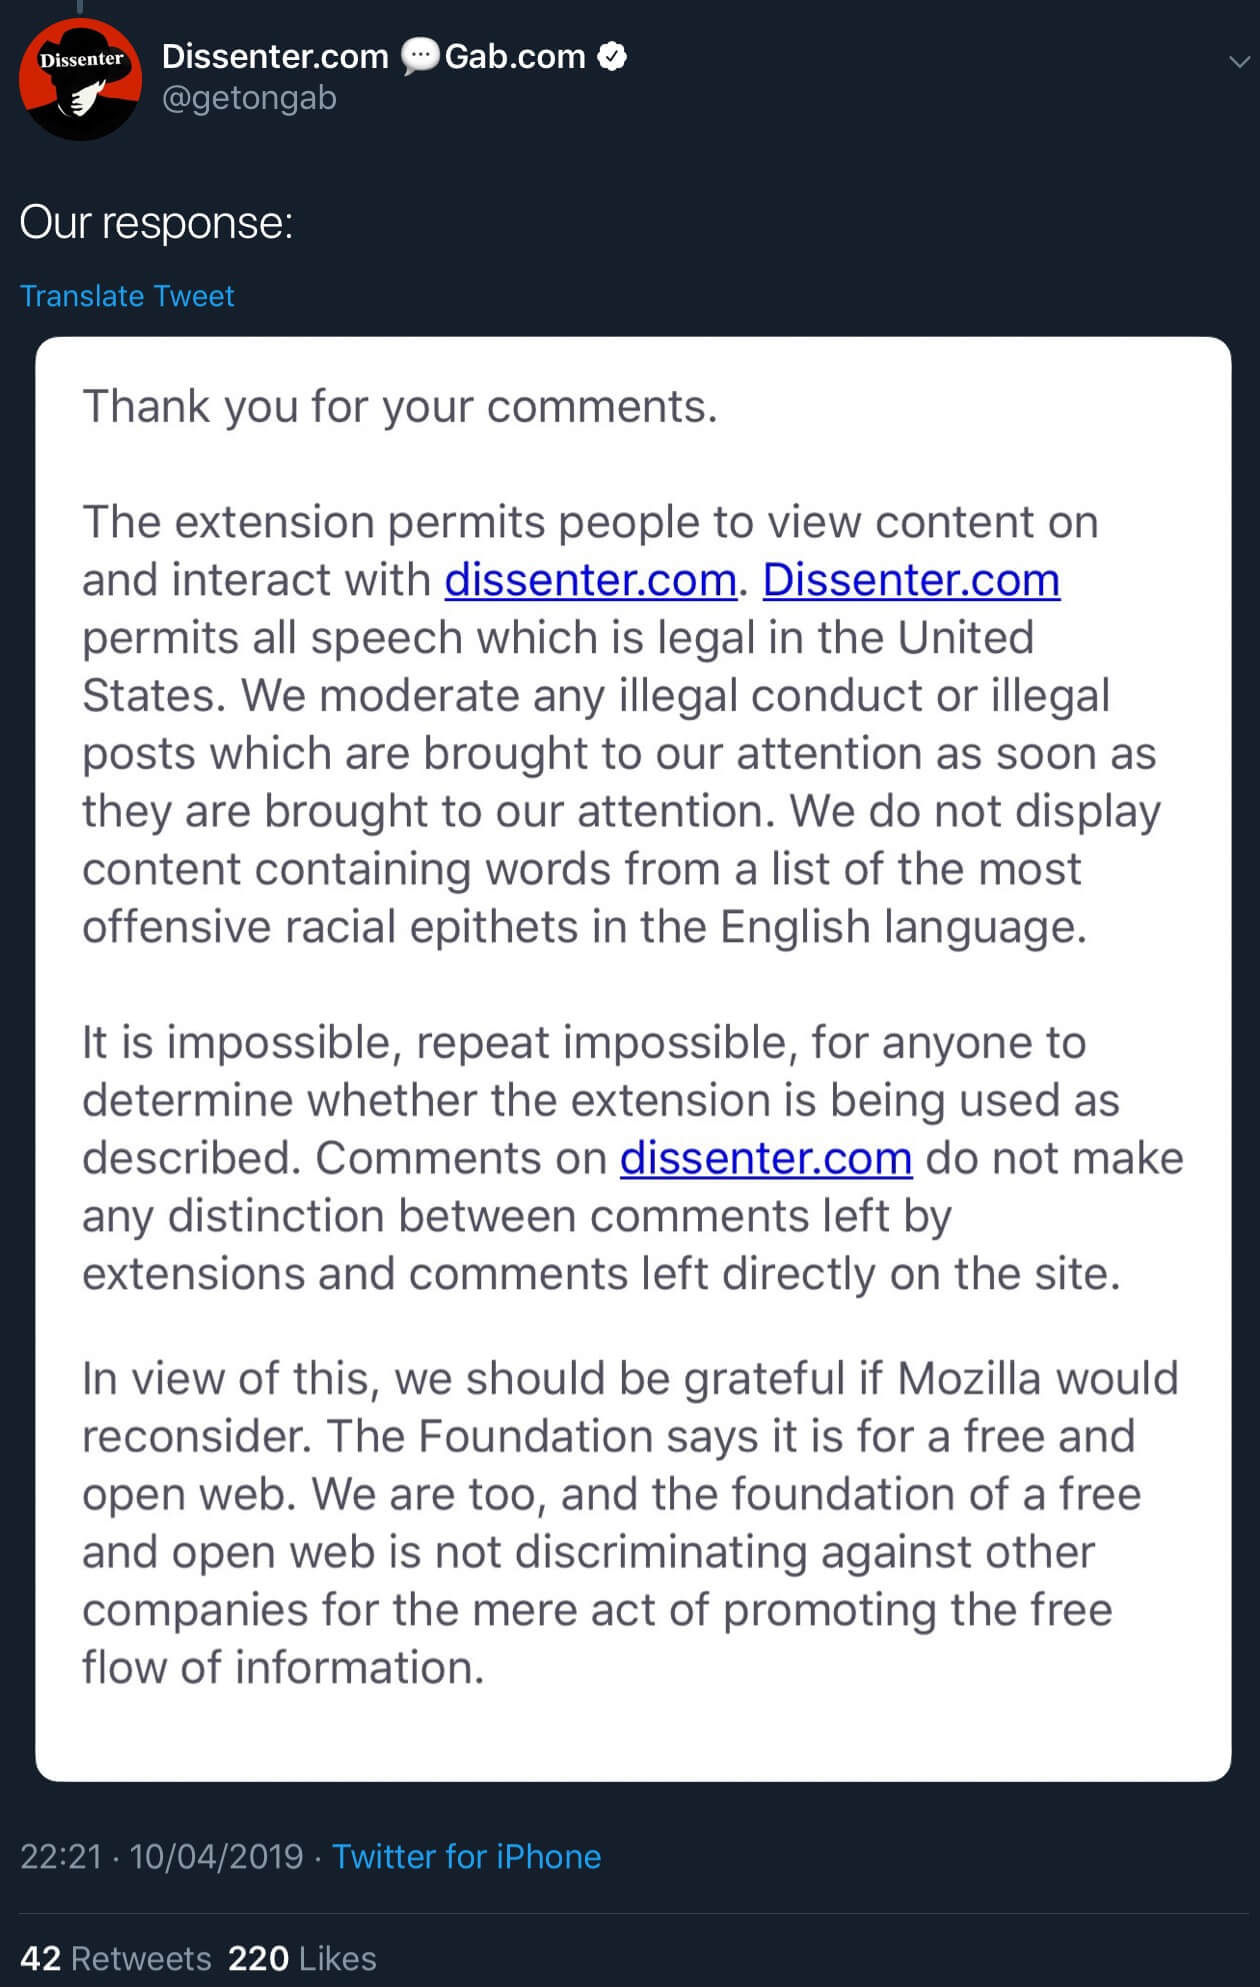 Dissenter’s email replying to Mozilla and asking it to reconsider the ban.